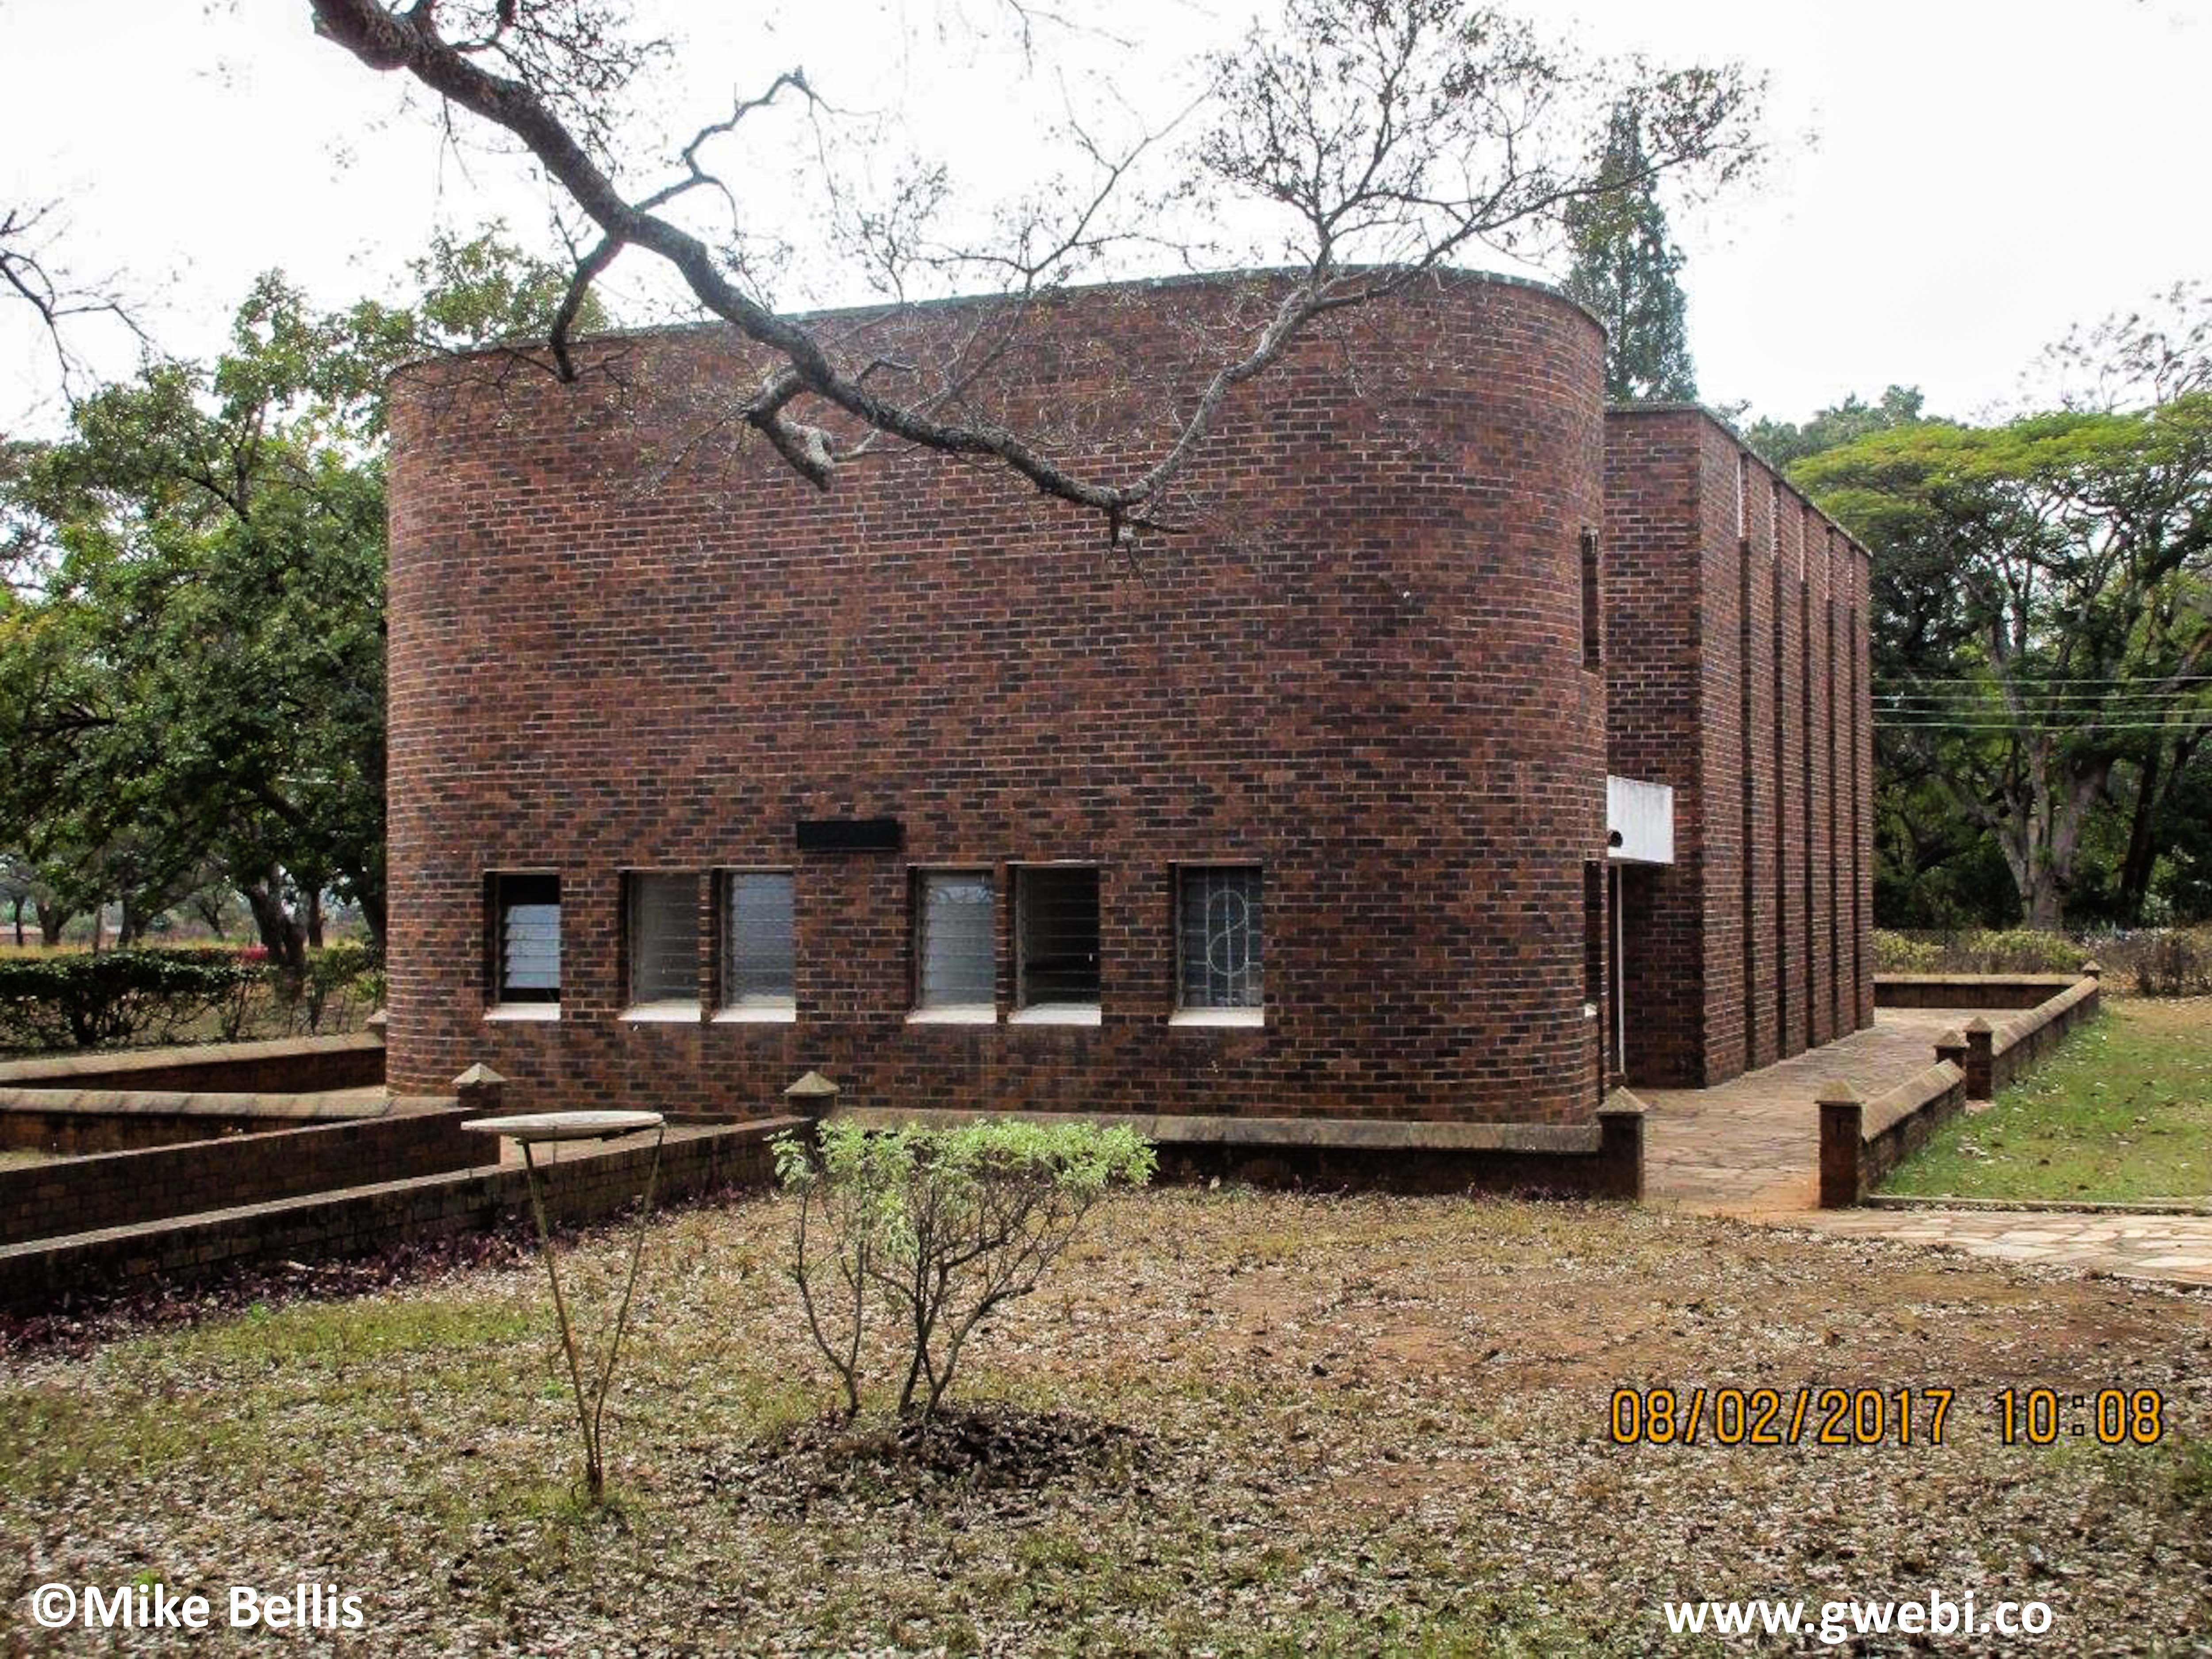 Gwebi College of Agriculture lecture theatre